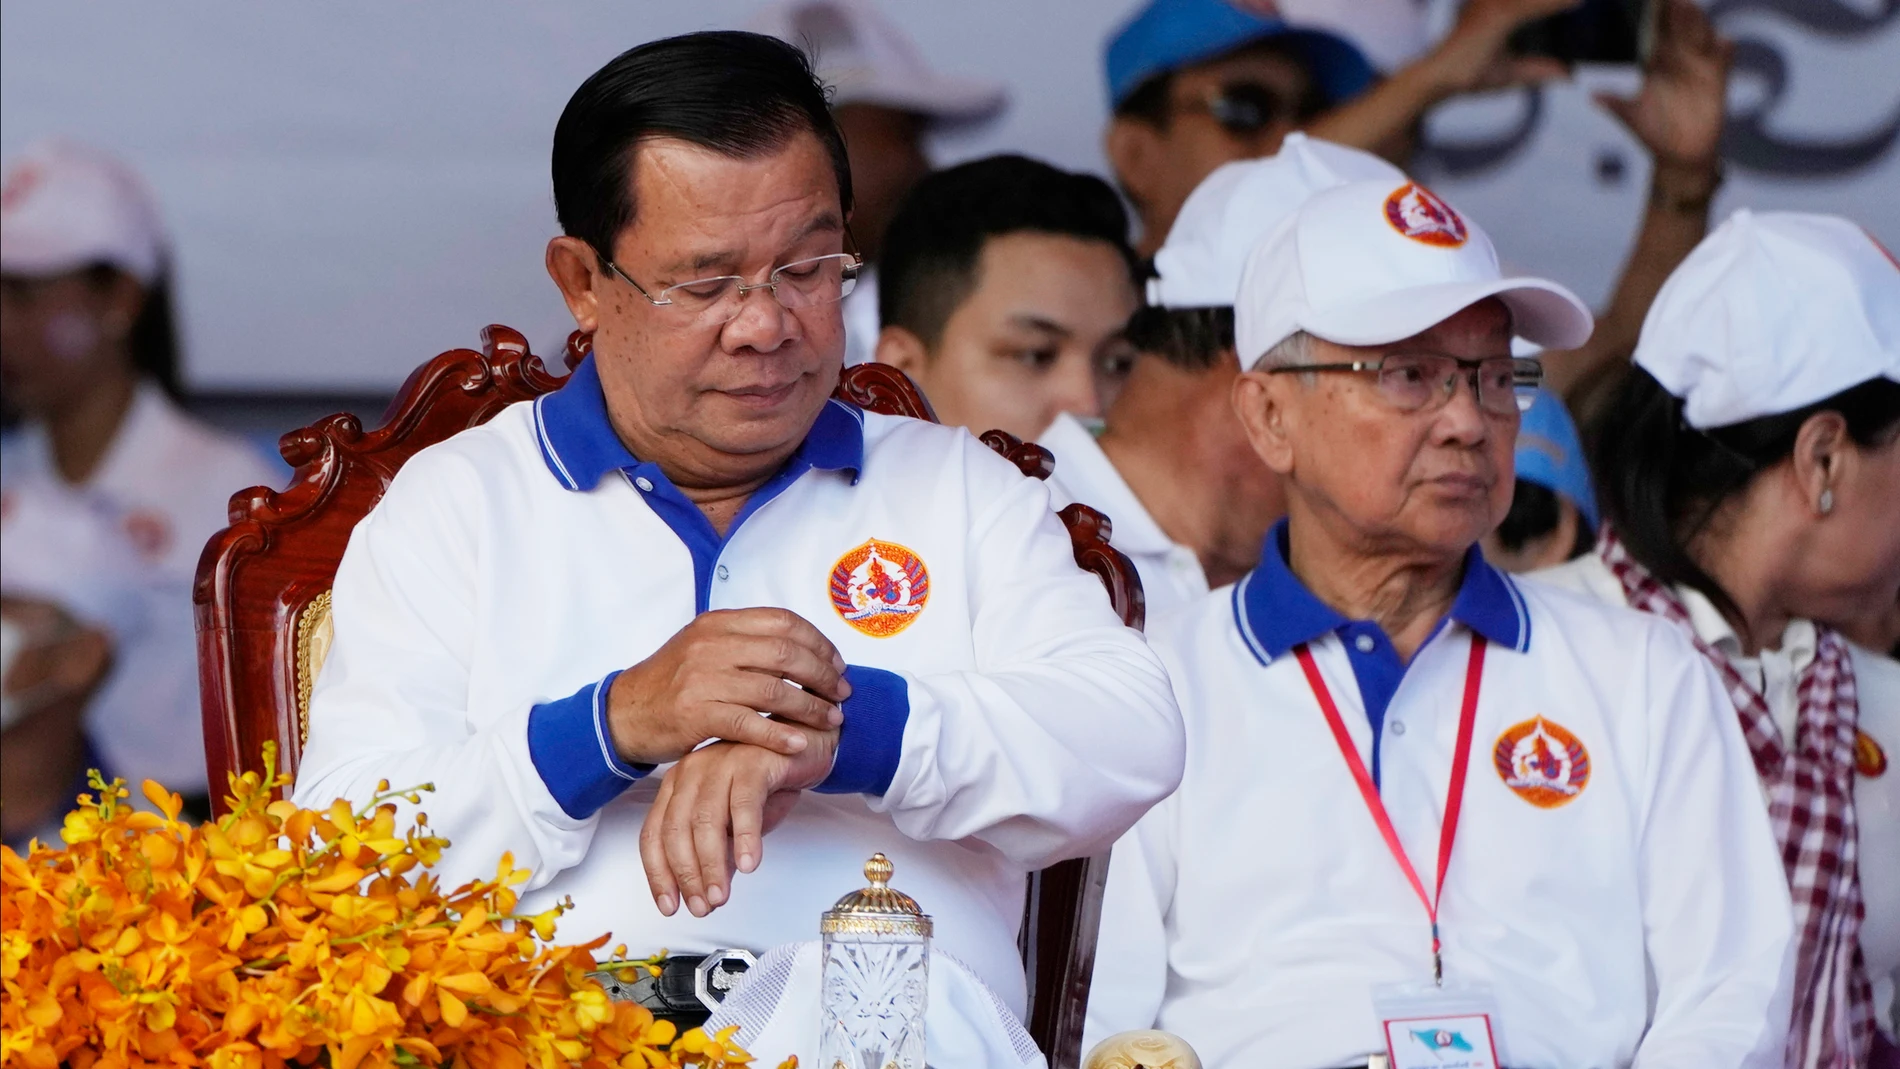 Cambodia Prime Minister Hun Sen, front left, also President of Cambodian People's Party, looks at his watch during his party election campaign in Phnom Penh Cambodia, on July 1, 2023. Longtime Cambodian leader Hun Sen said Wednesday, July 26, he will step down in three weeks as prime minister and hand the position to his oldest son, who won his first seat in Parliament in Sunday's election. (AP Photo/Heng Sinith)